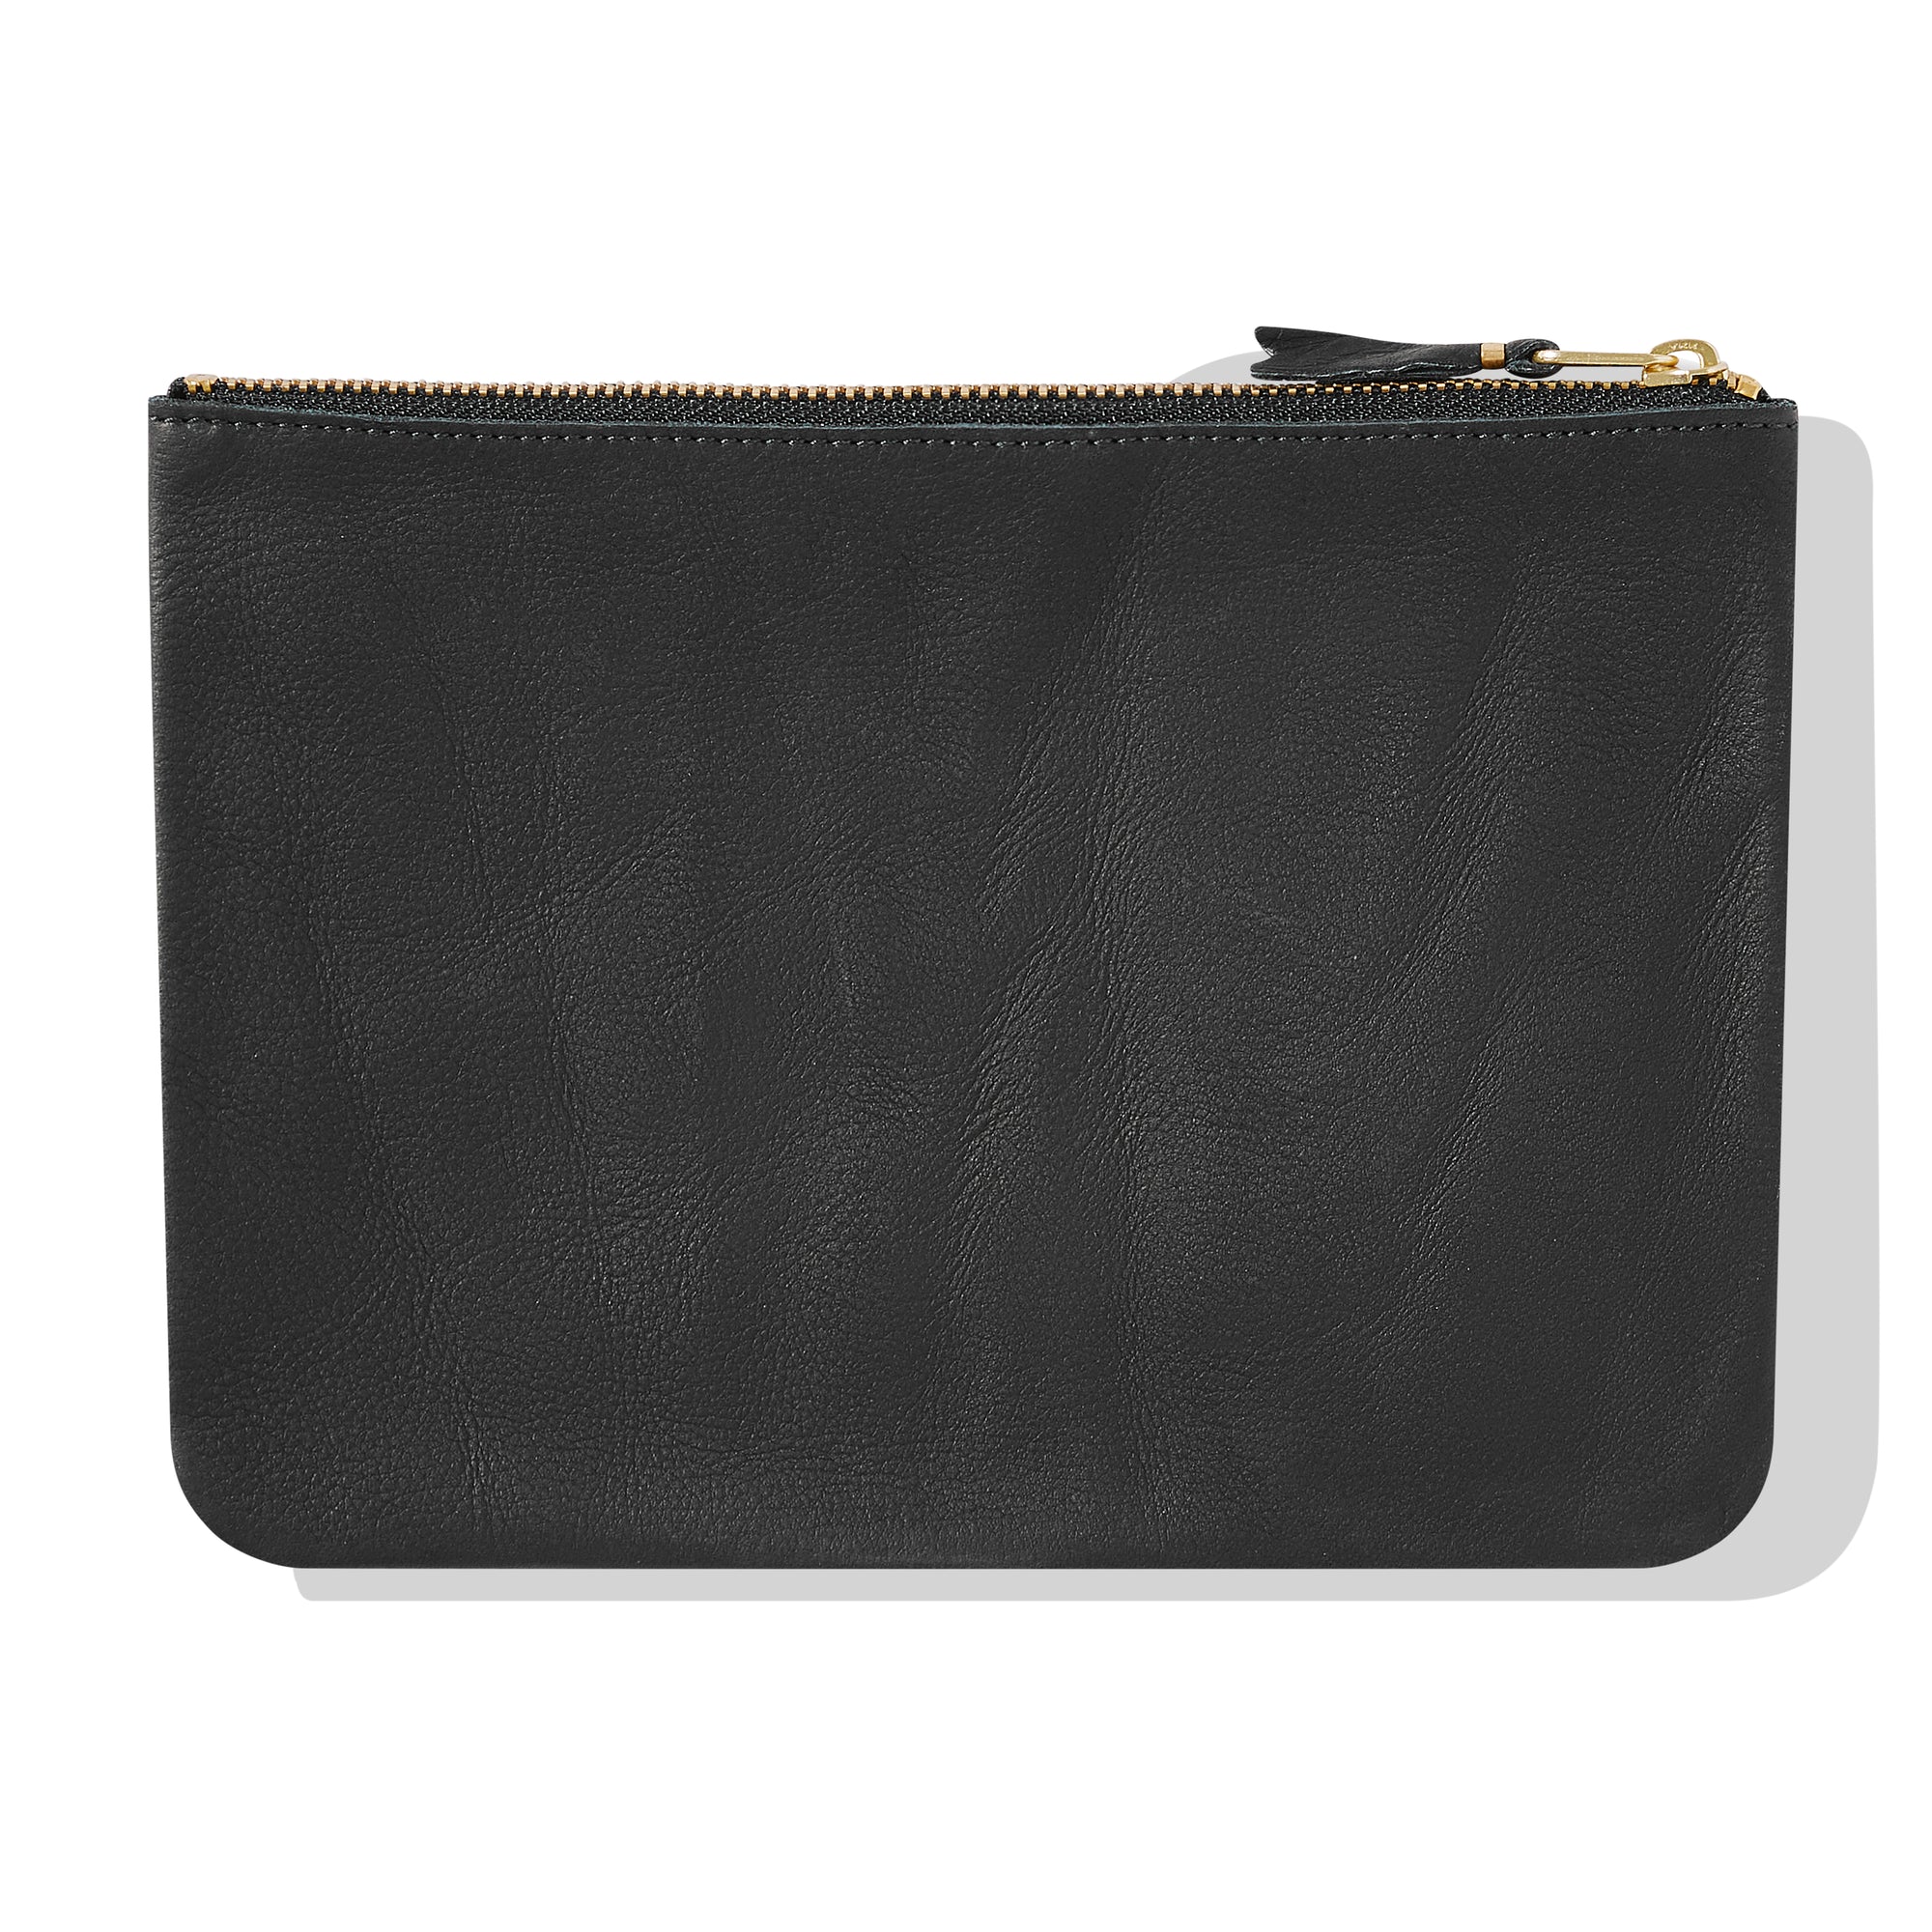 CDG Wallet - Washed Zip Pouch - (Black) view 2